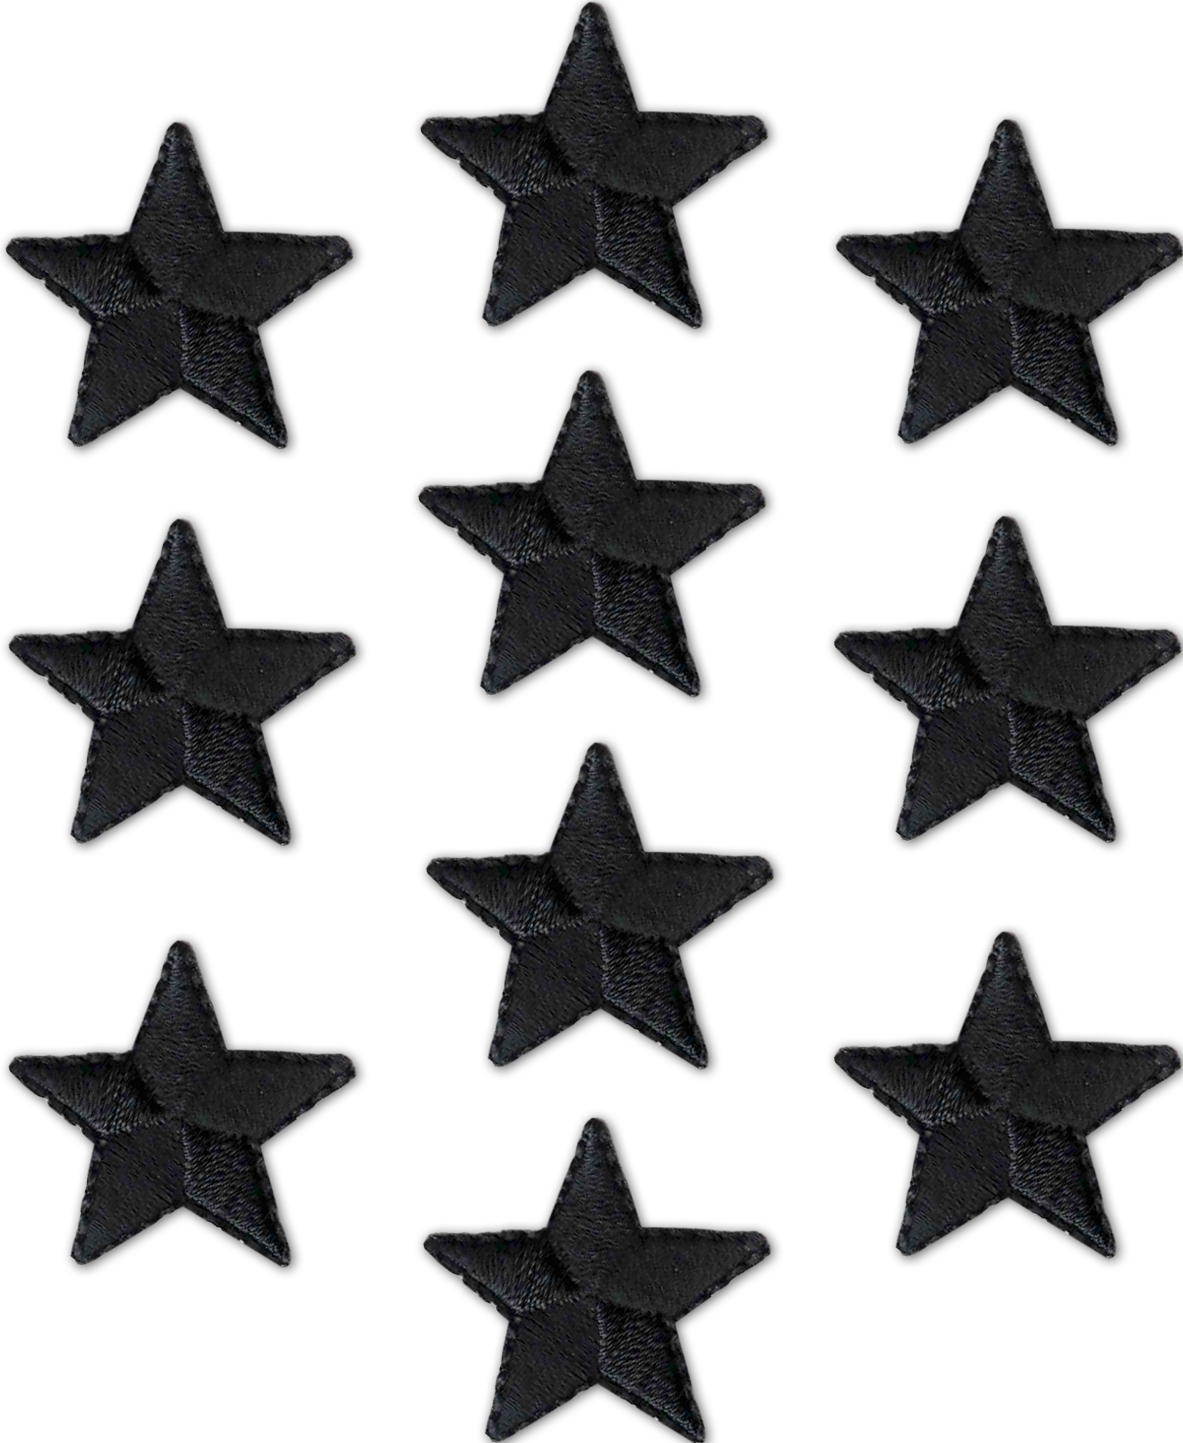 Black One inch Star Patches, (10-Pack) Iron on Star Embroidered Patch Applique Embellishments for Clothing, Jackets, Backpacks, and Decorations